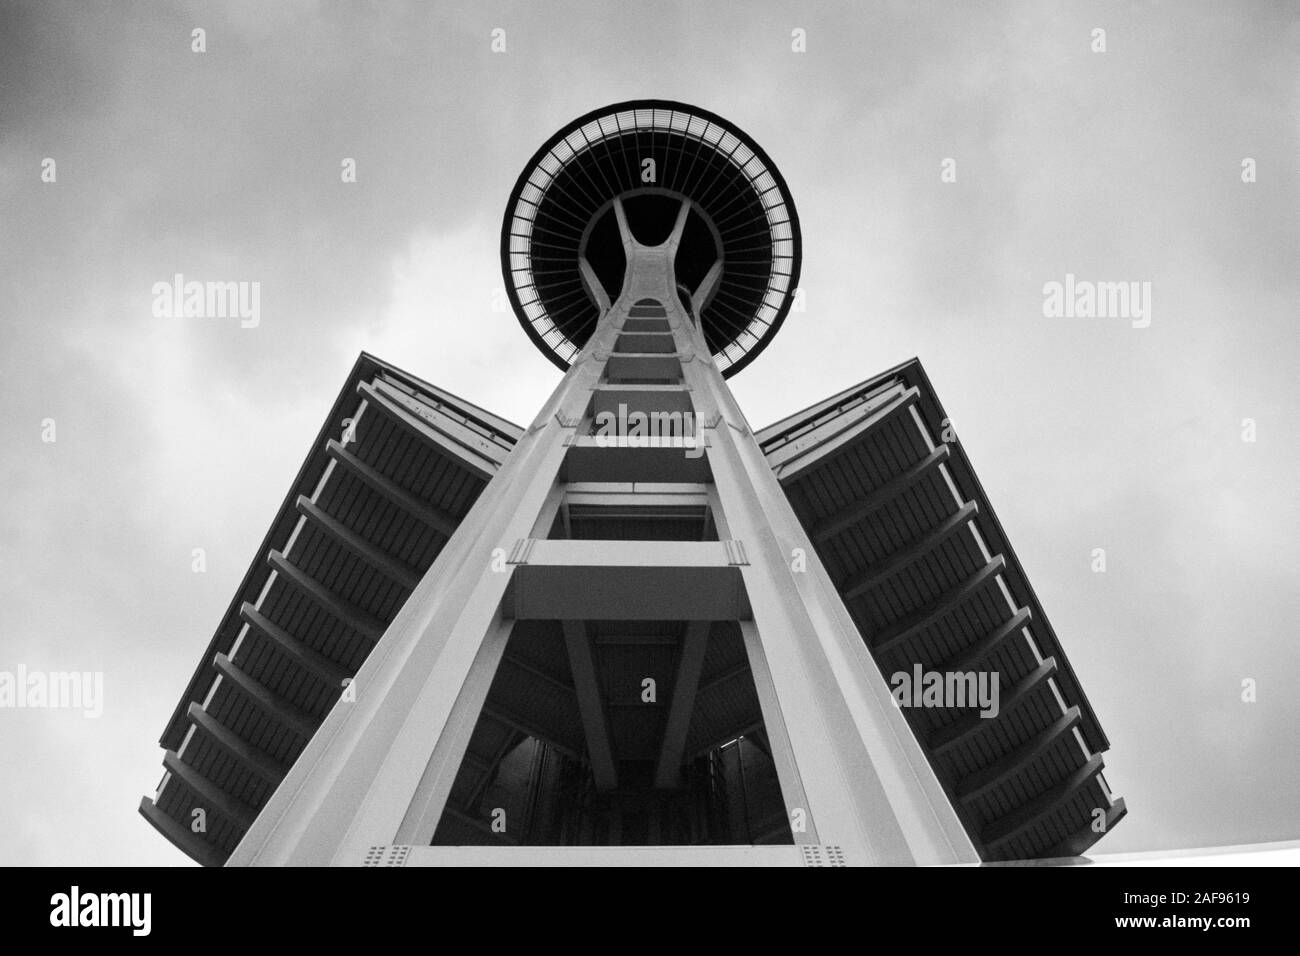 Seattle, Washington, USA - May 1992:  Archival black and white view of the iconic Space Needle observation tower with cloudy sky. Stock Photo